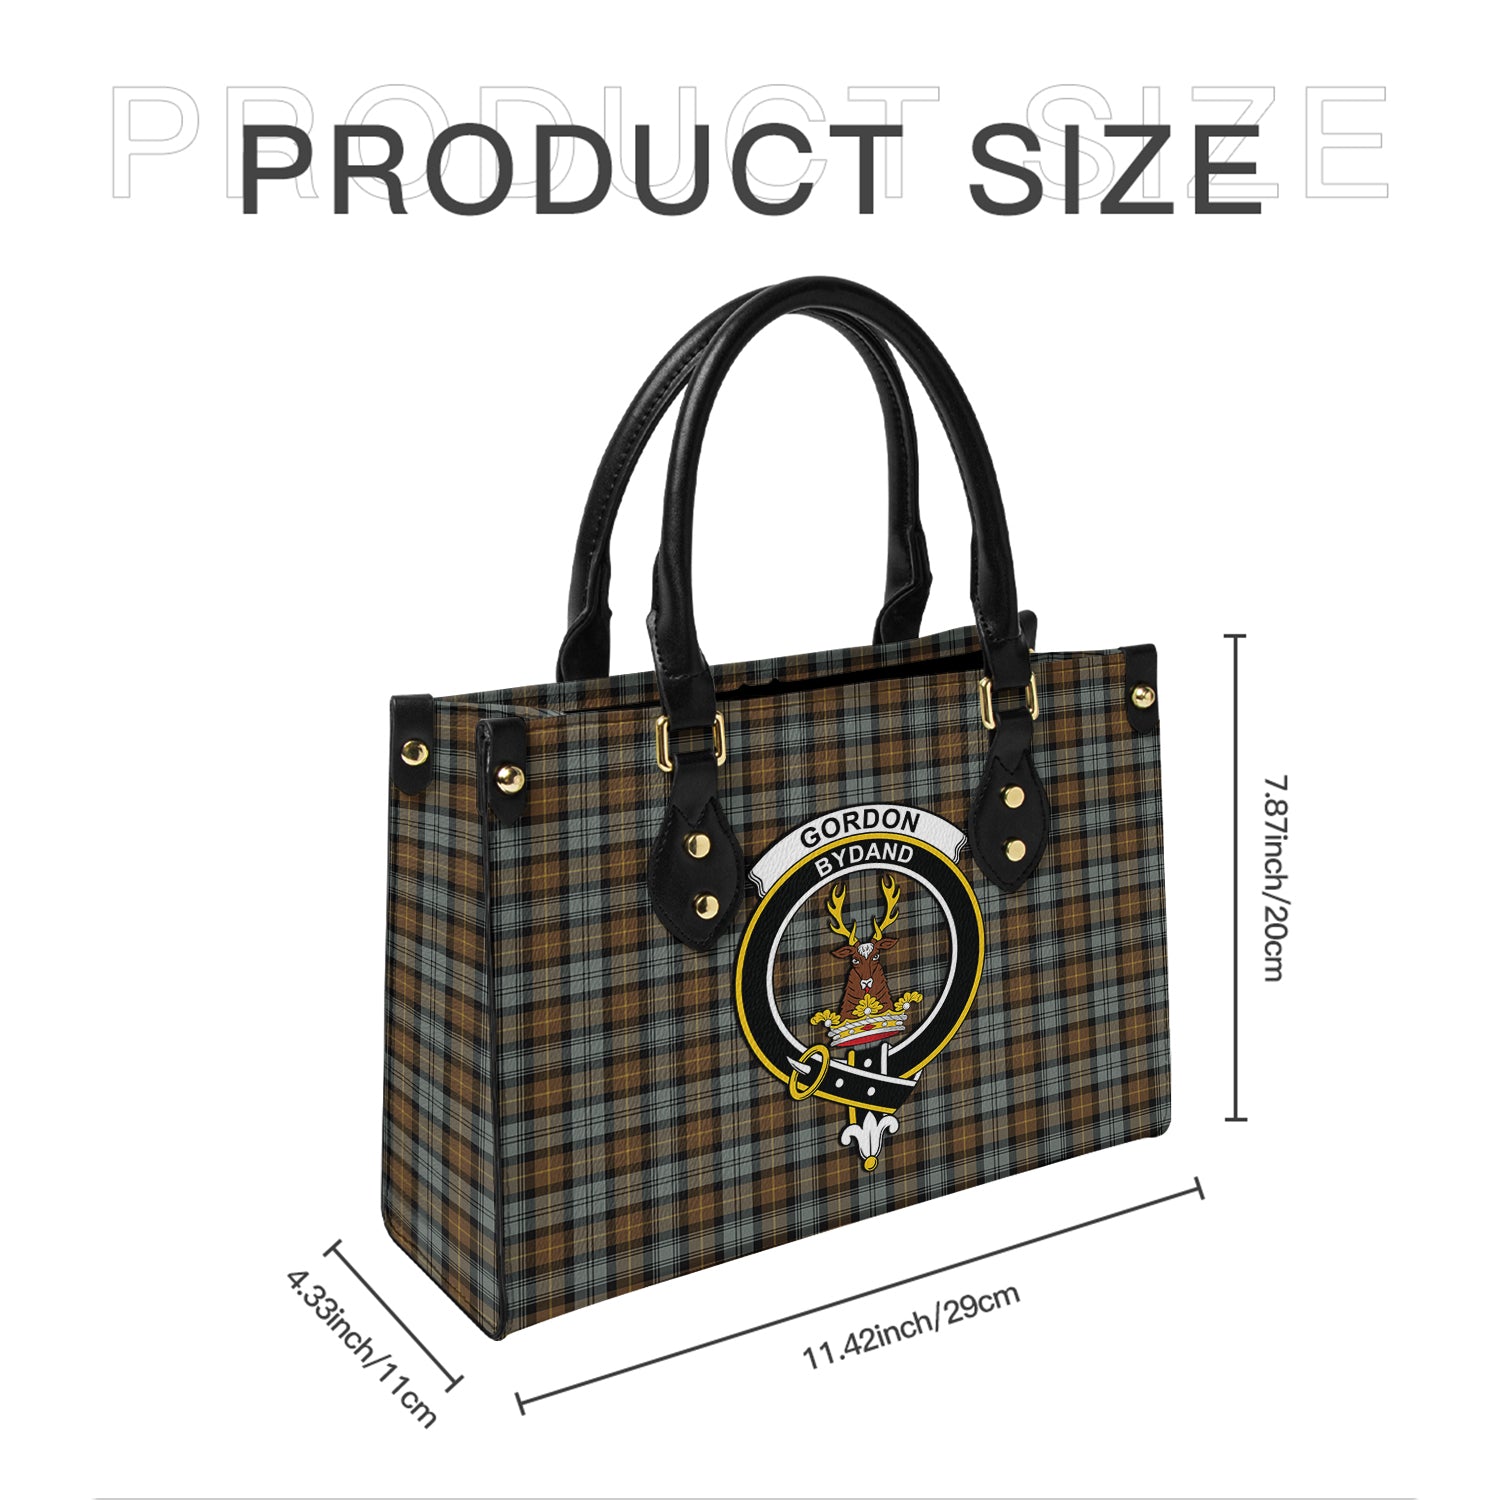 gordon-weathered-tartan-leather-bag-with-family-crest